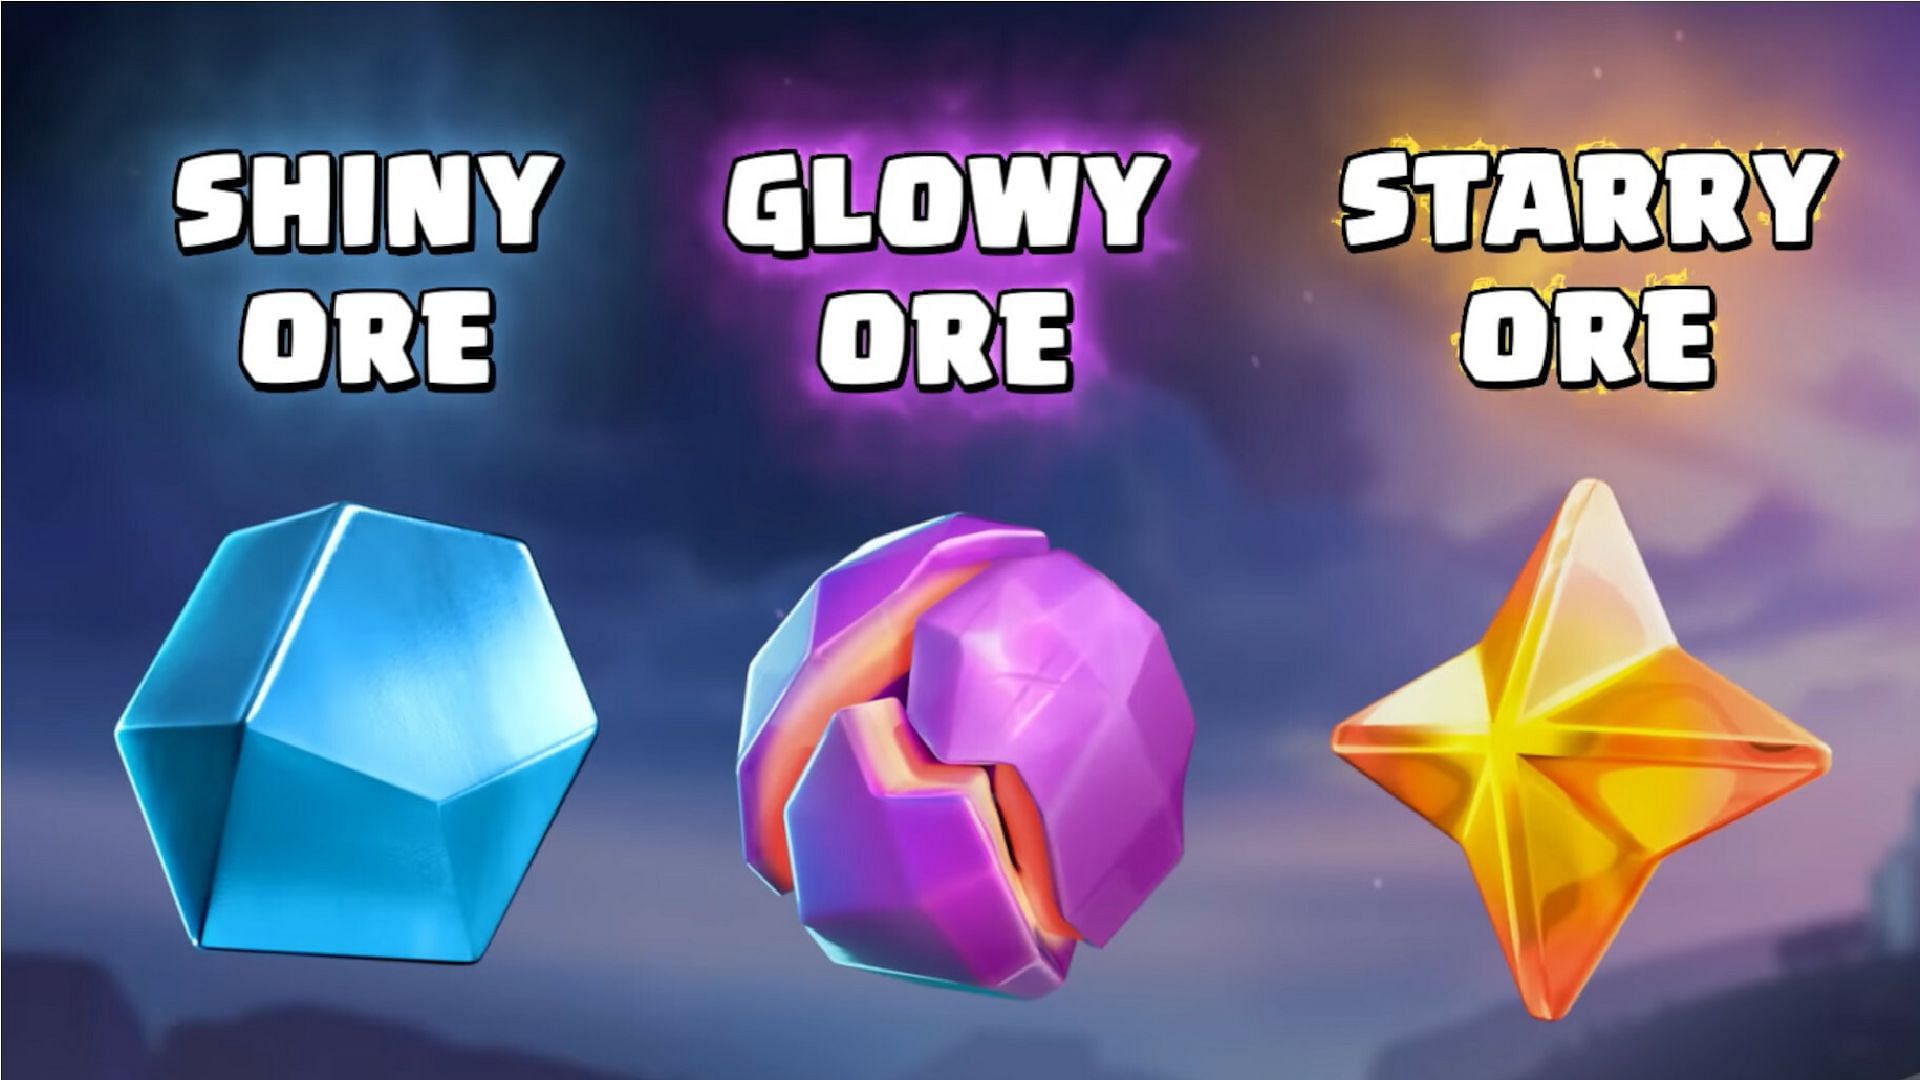 Types of ores in the game (Image via Supercell)